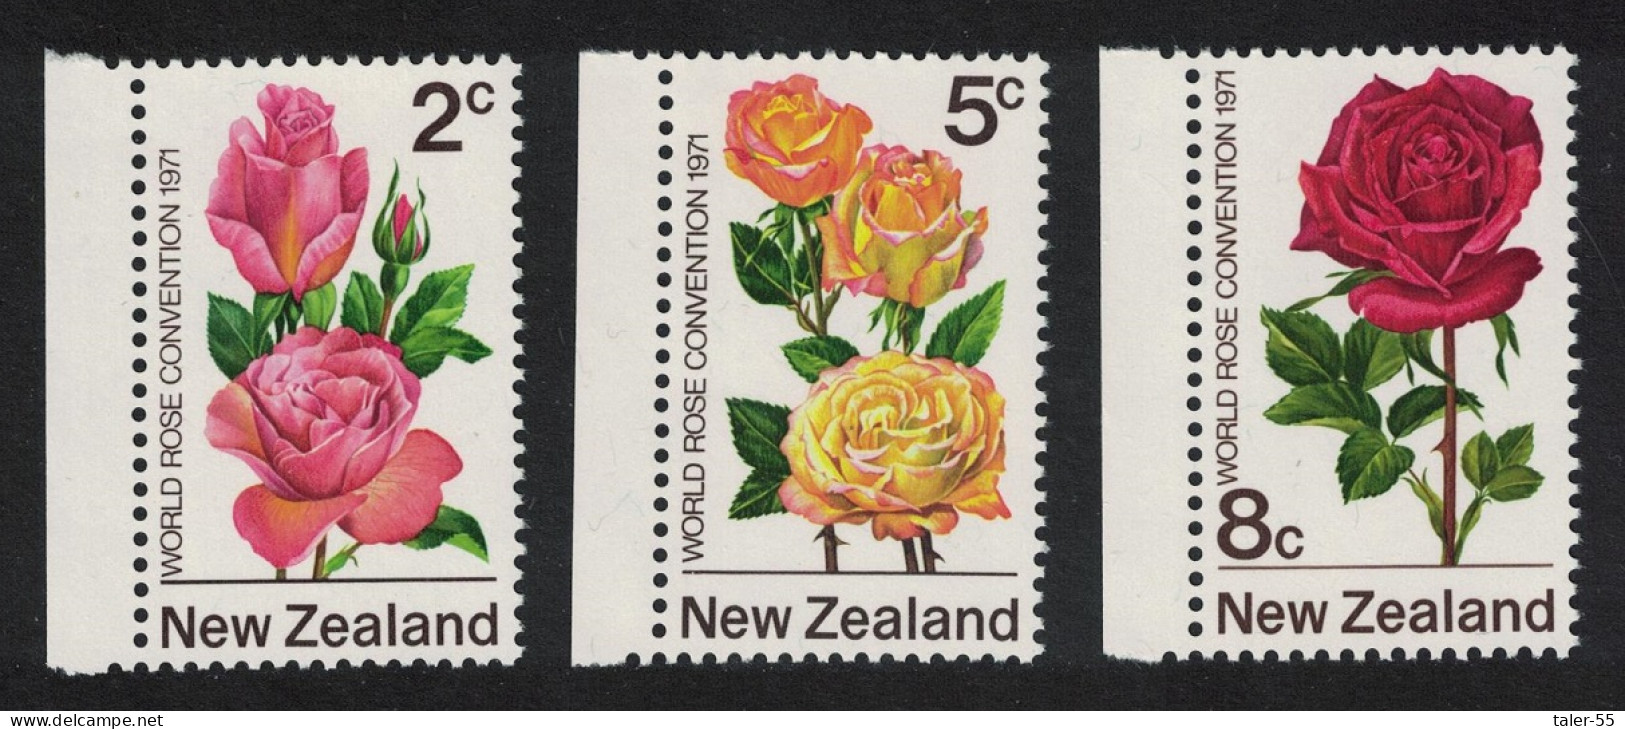 New Zealand Roses Flowers Convention Hamilton 3v Margins 1971 MNH SG#967-969 - Unused Stamps